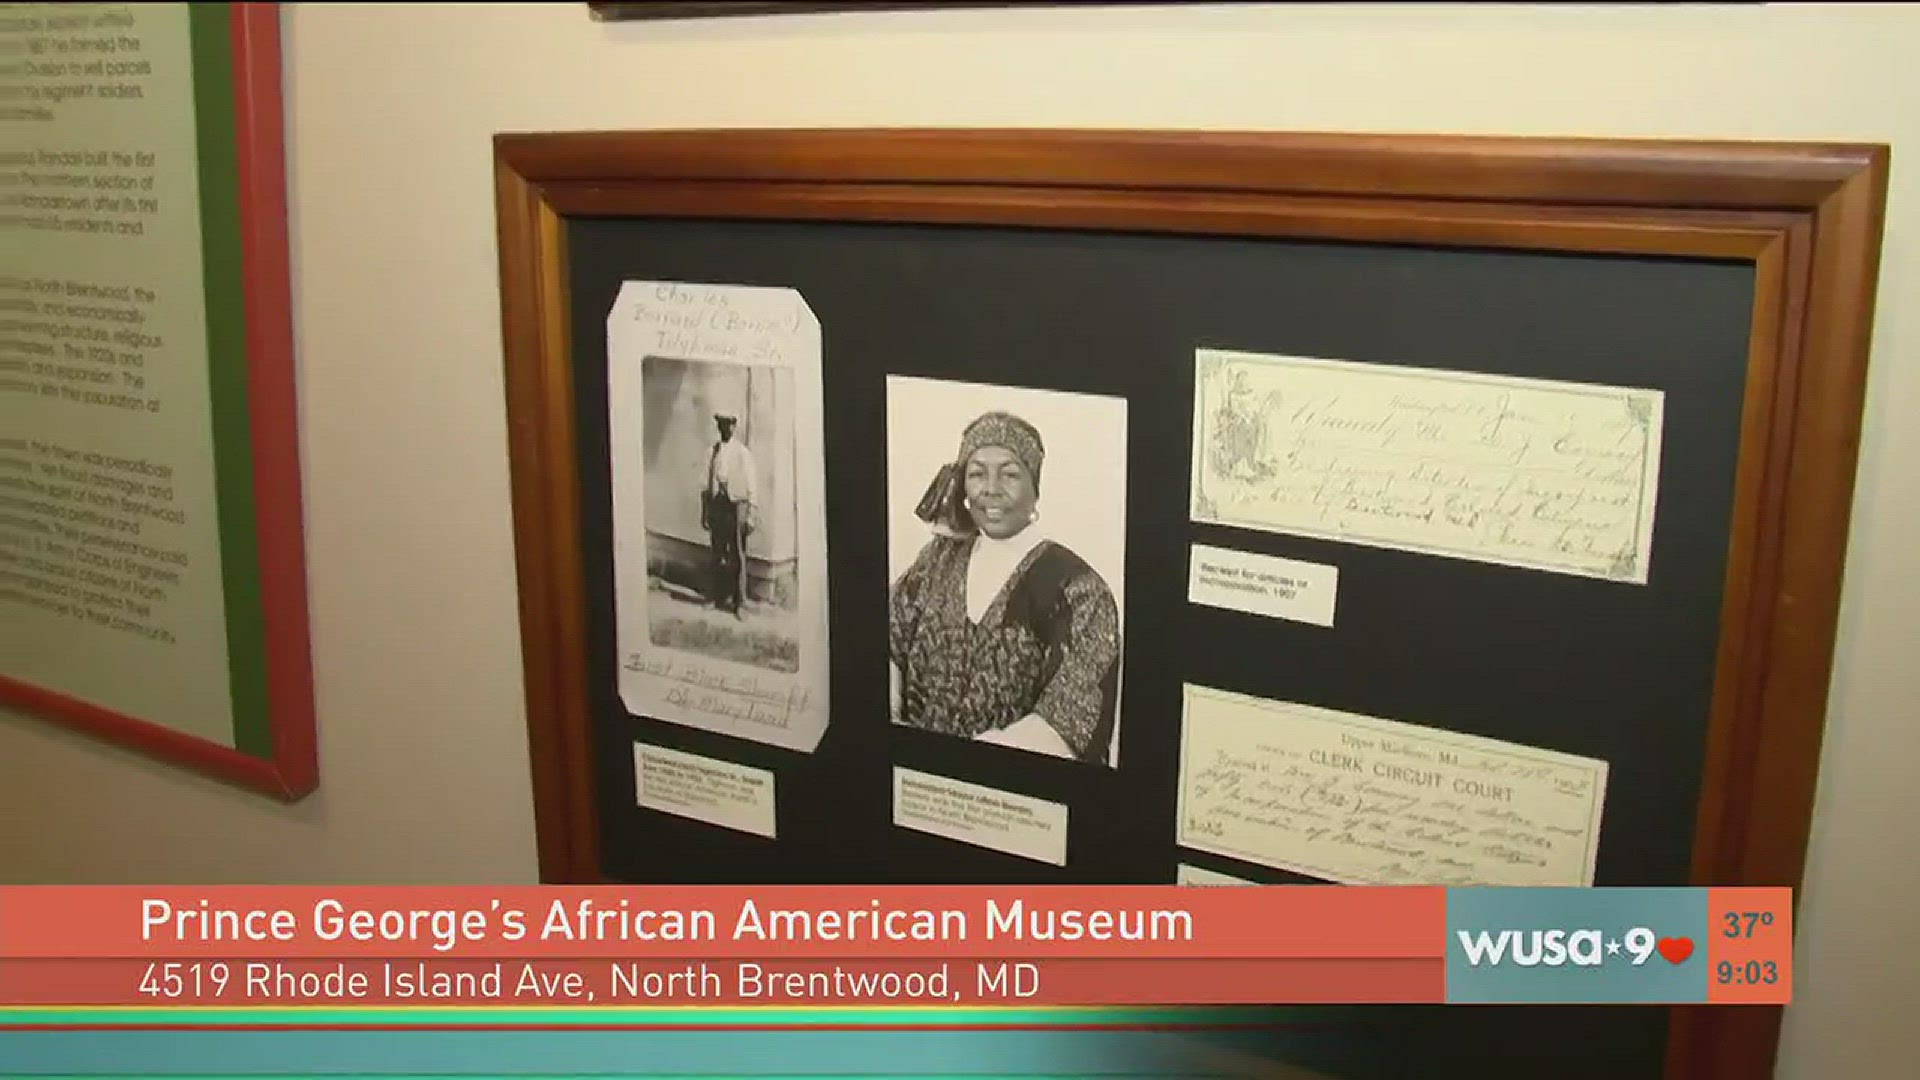 Meaghan takes a trip through history as she visits the Prince George's African American Museum in North Brentwood, MD and learns all that the museum has to offer.